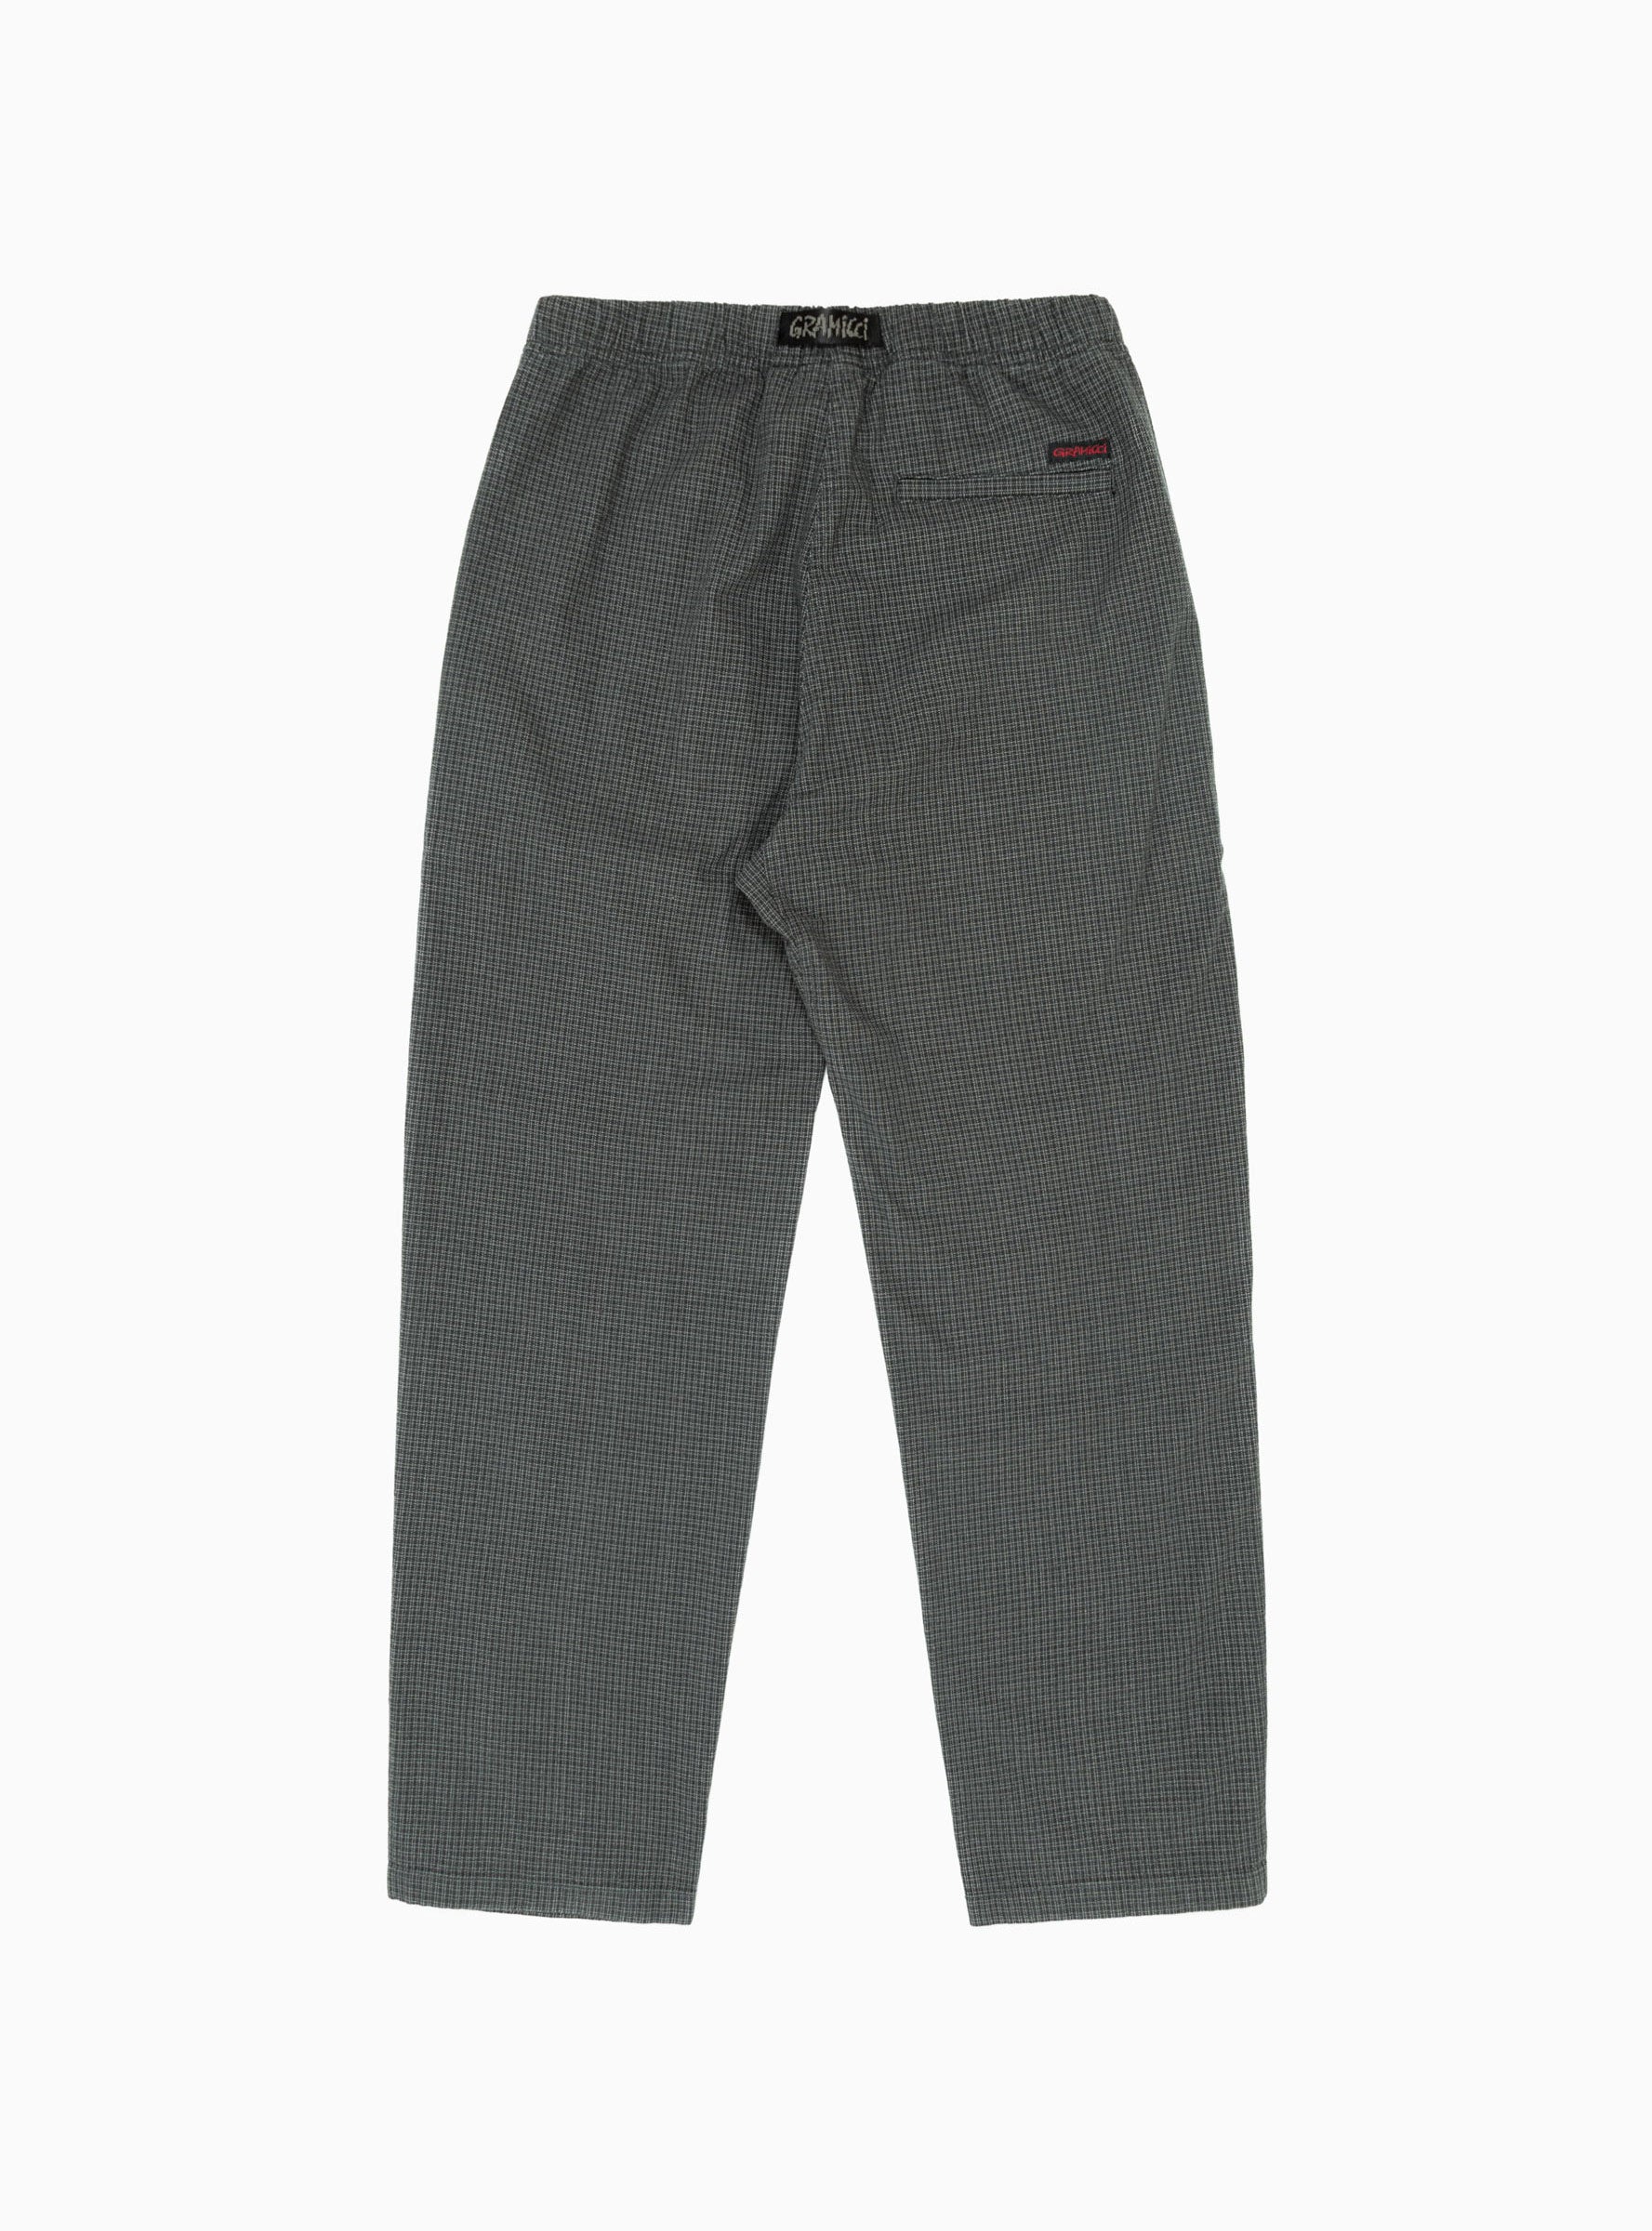 O.G. Dyed Woven Dobby Jam Trousers Grey Check by Gramicci